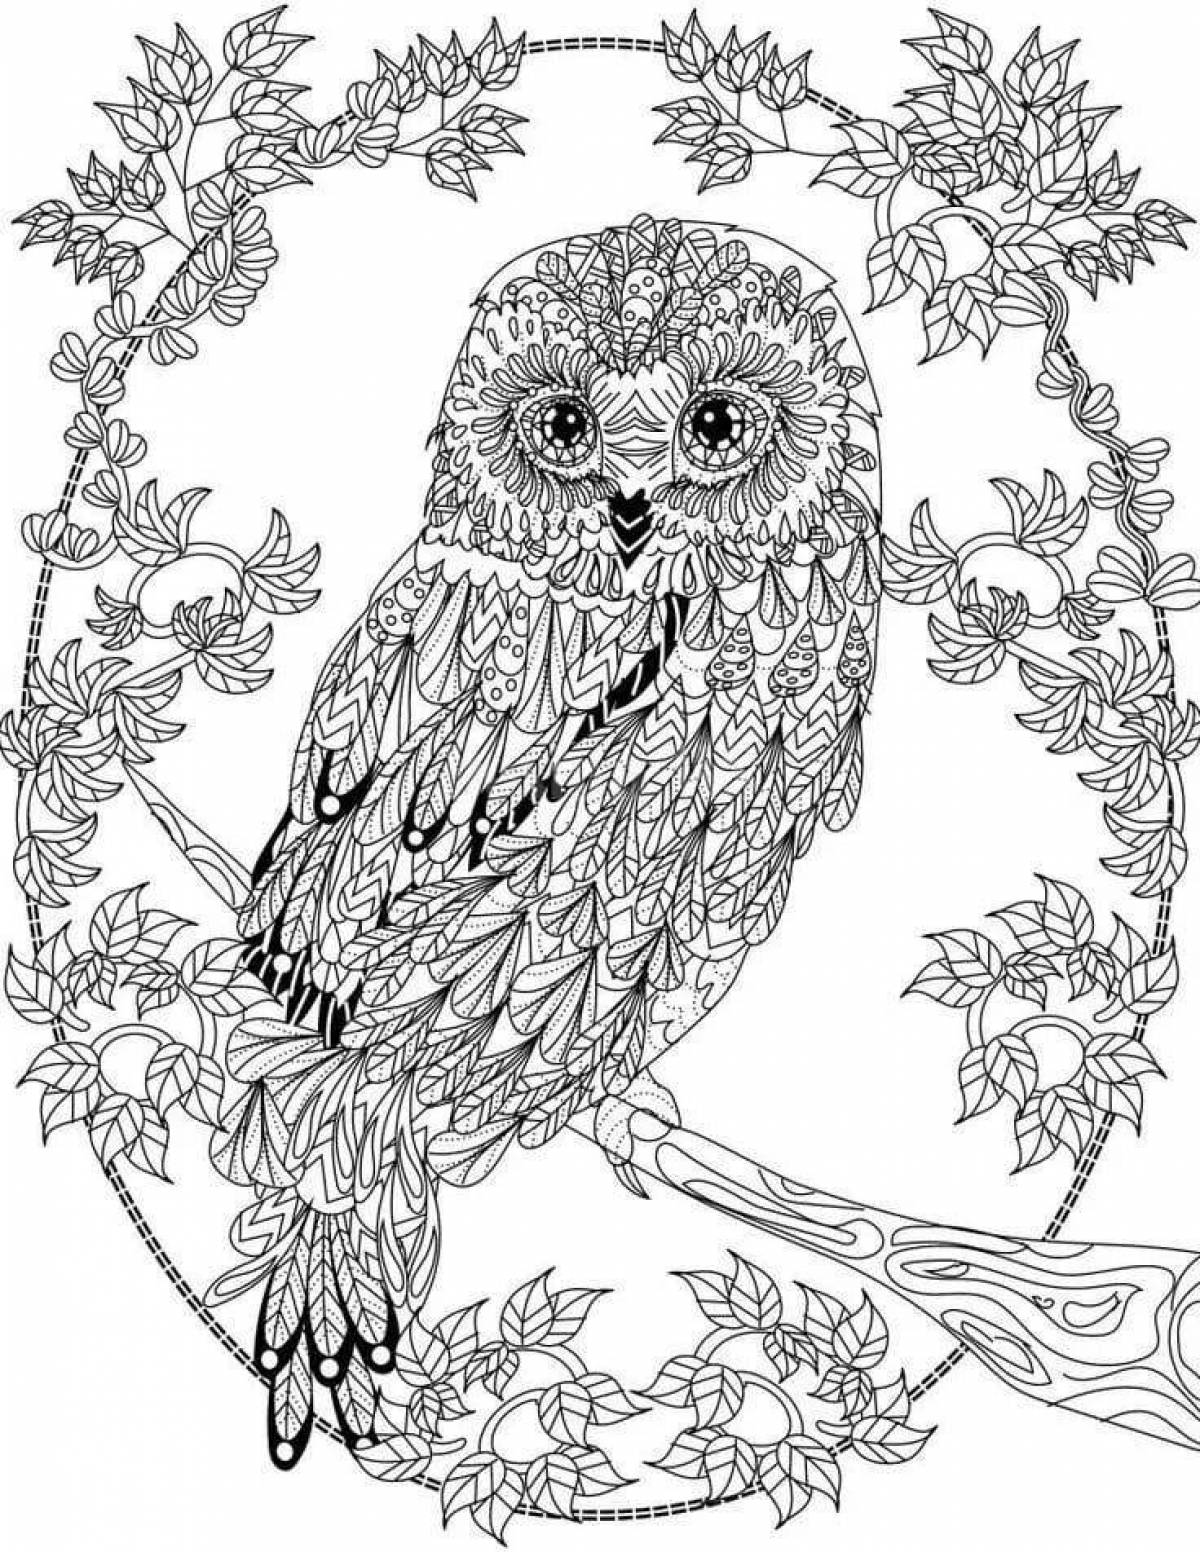 Fancy owl coloring pages